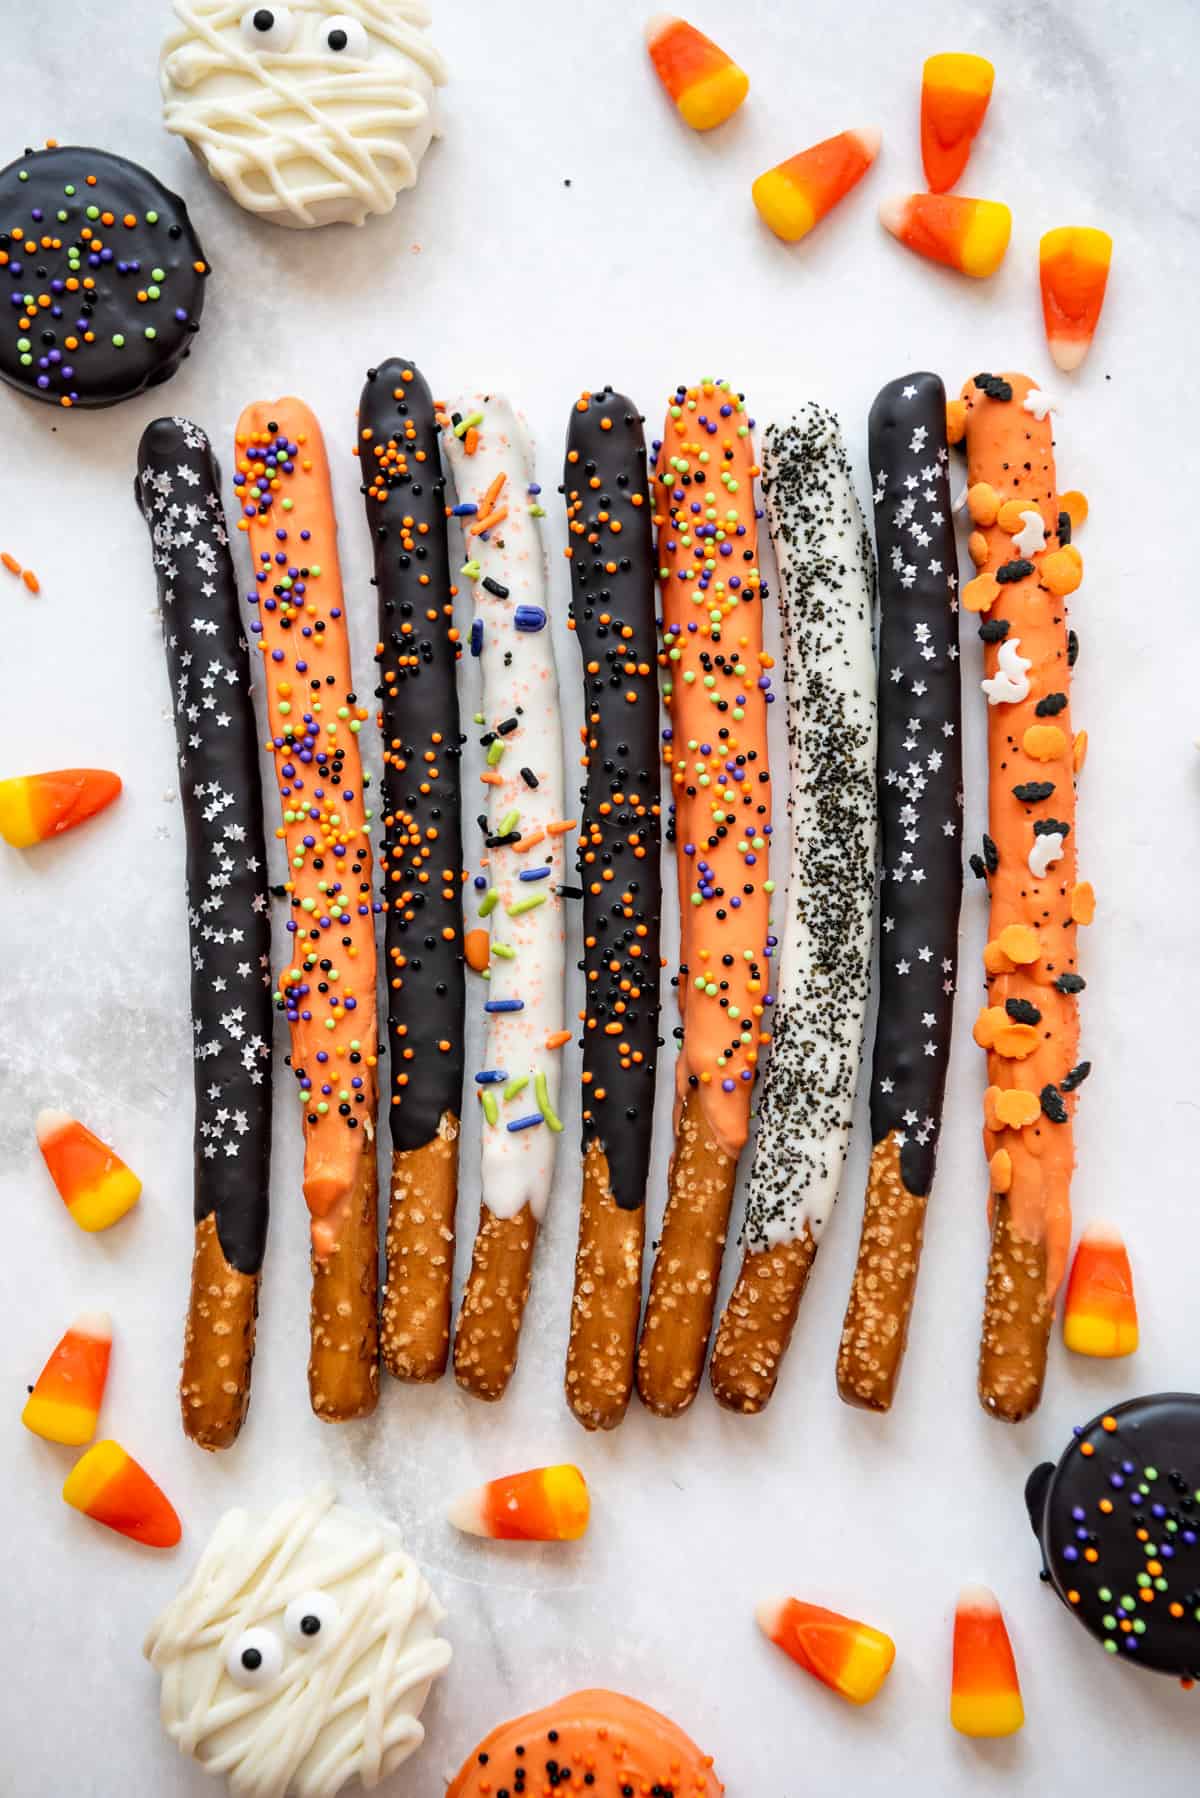 Halloween pretzels decorated with black, white, and orange melted chocolate and sprinkles.